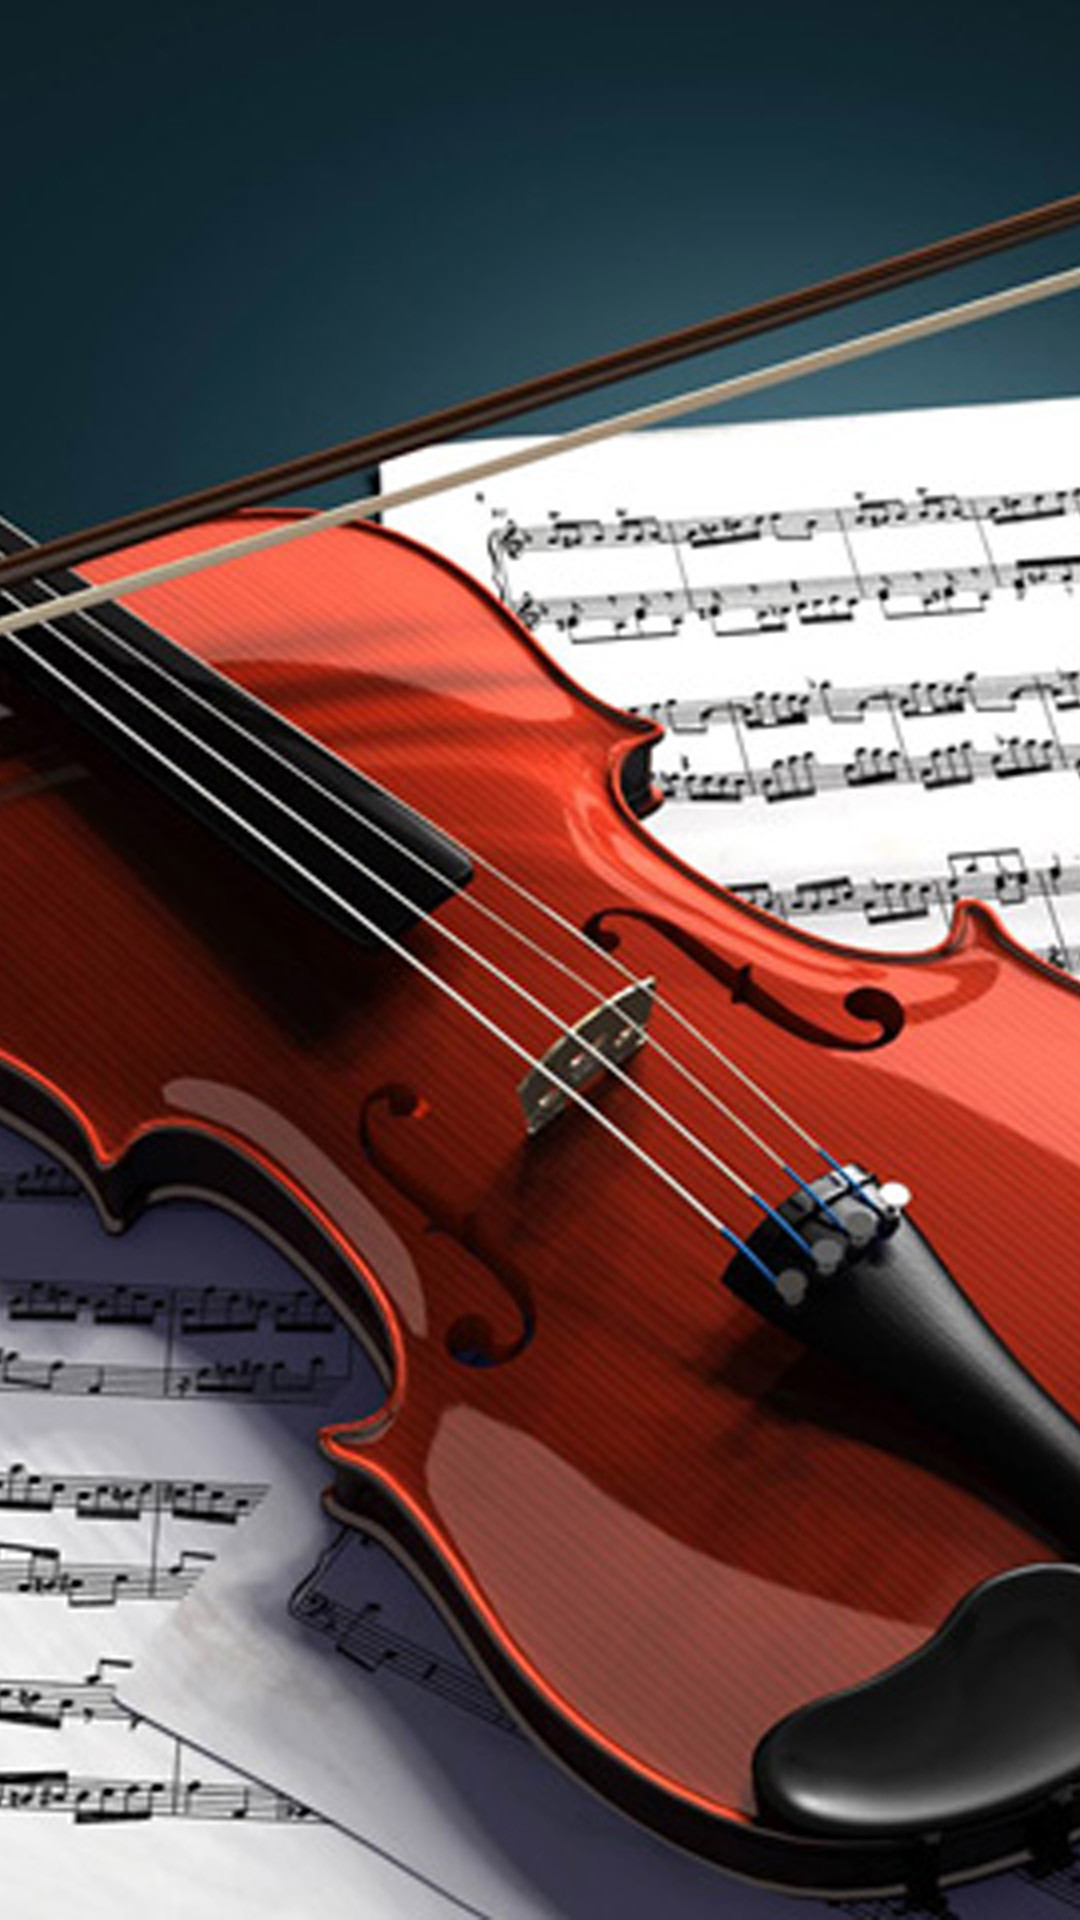 1080x1920 Beautiful Violin Wallpapers for Galaxy S5